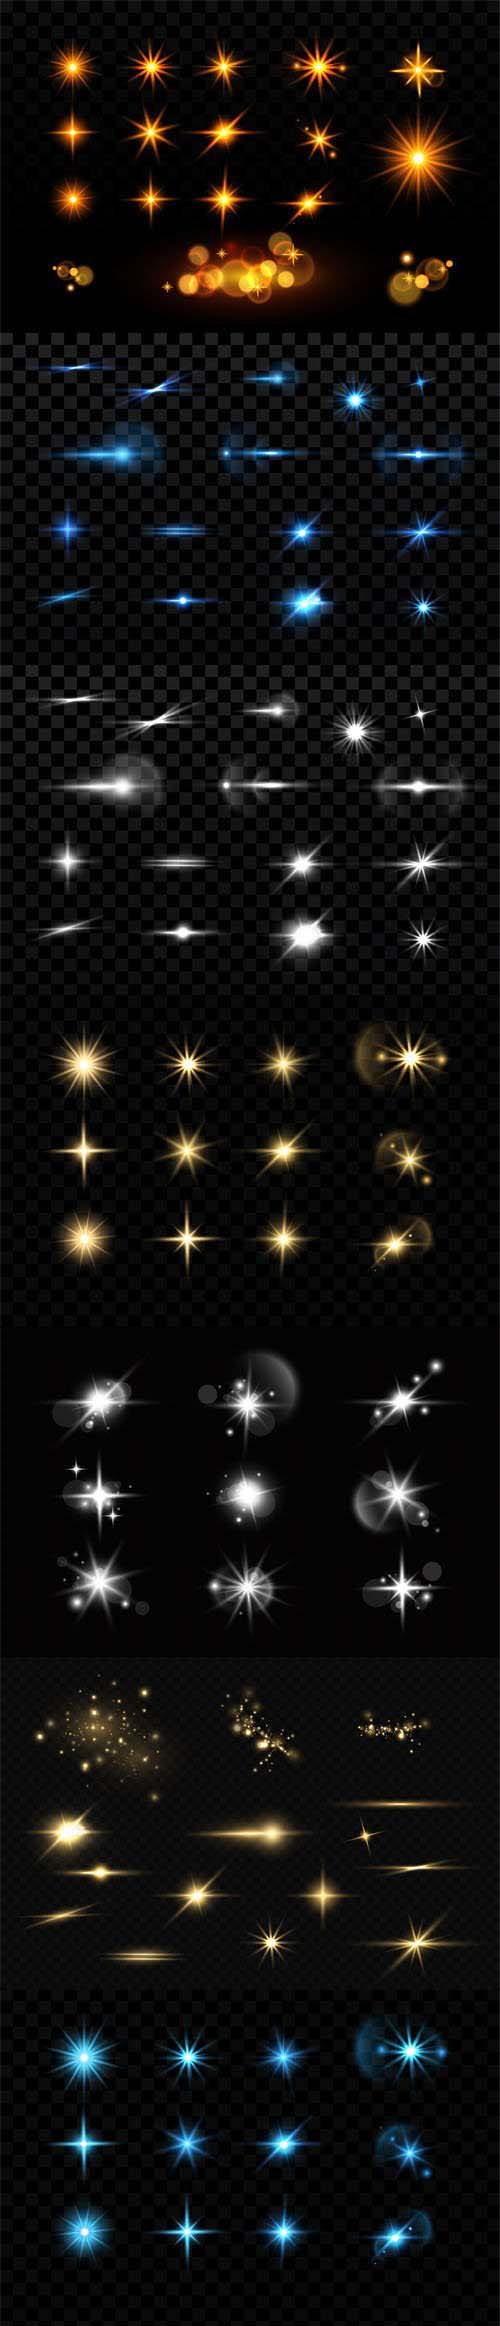 100+ Gold/Silver Stars & Lens Flare Vector Collection